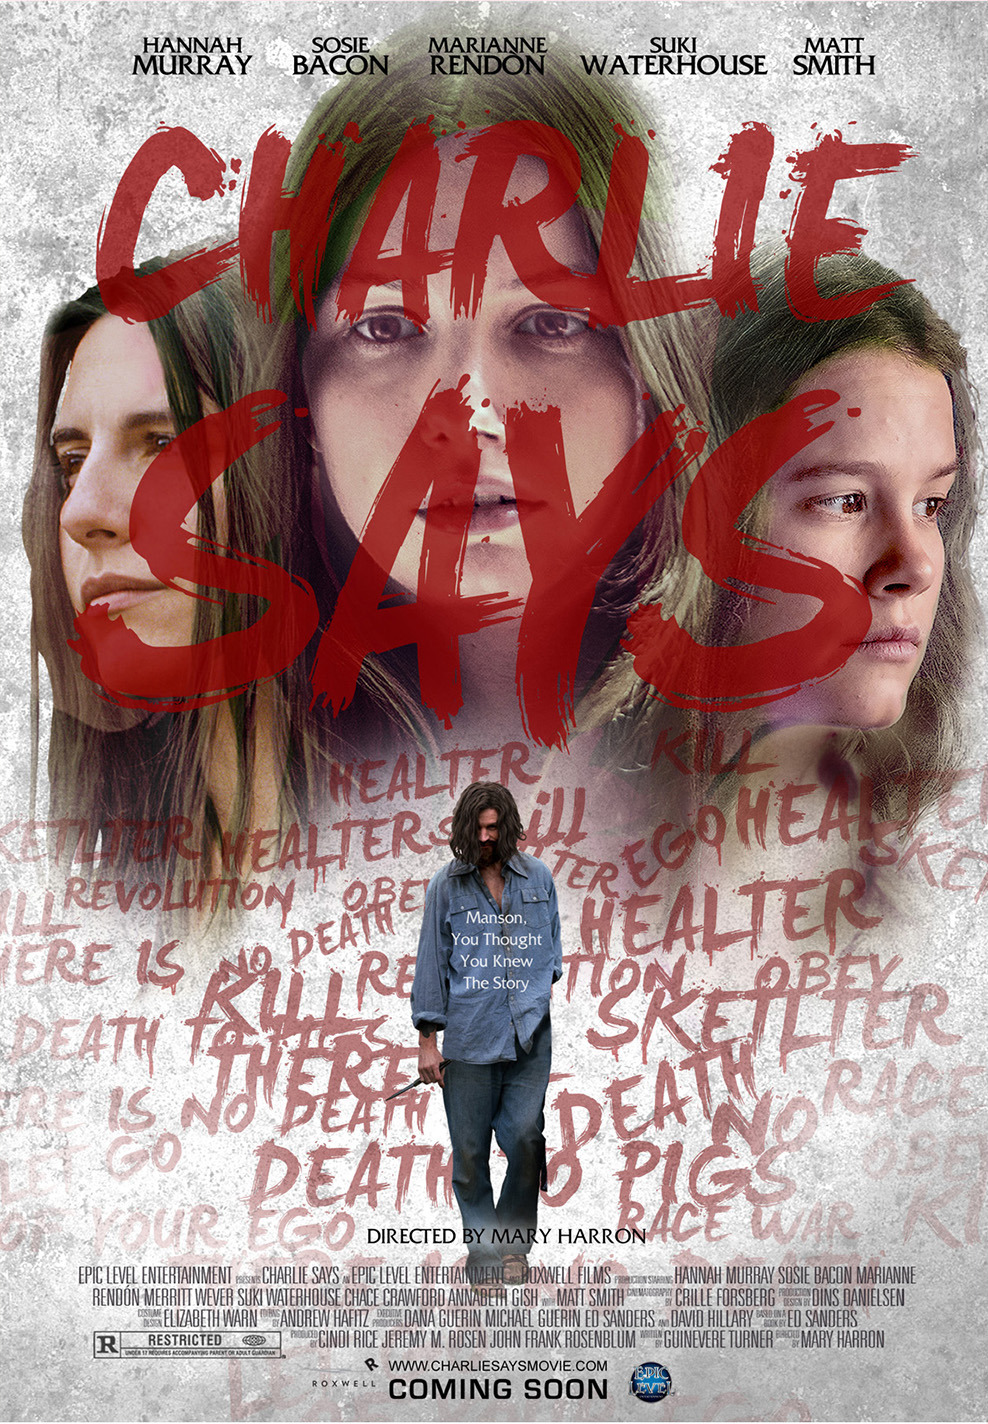 Extra Large Movie Poster Image for Charlie Says (#3 of 5)